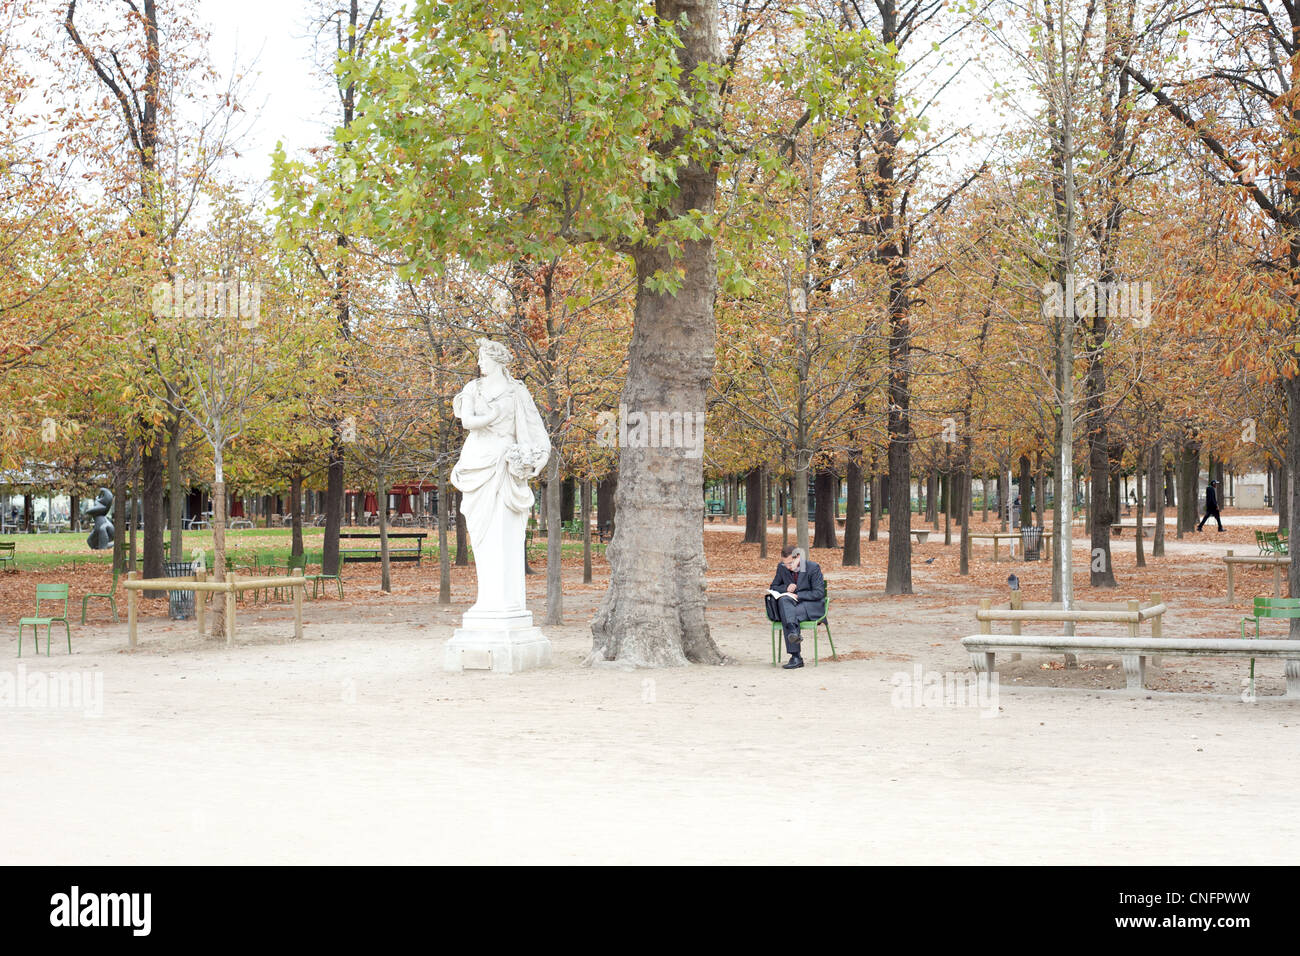 A man sitting in a chair reading, next to a statue in the Tuileries Garden in Paris, France. Stock Photo